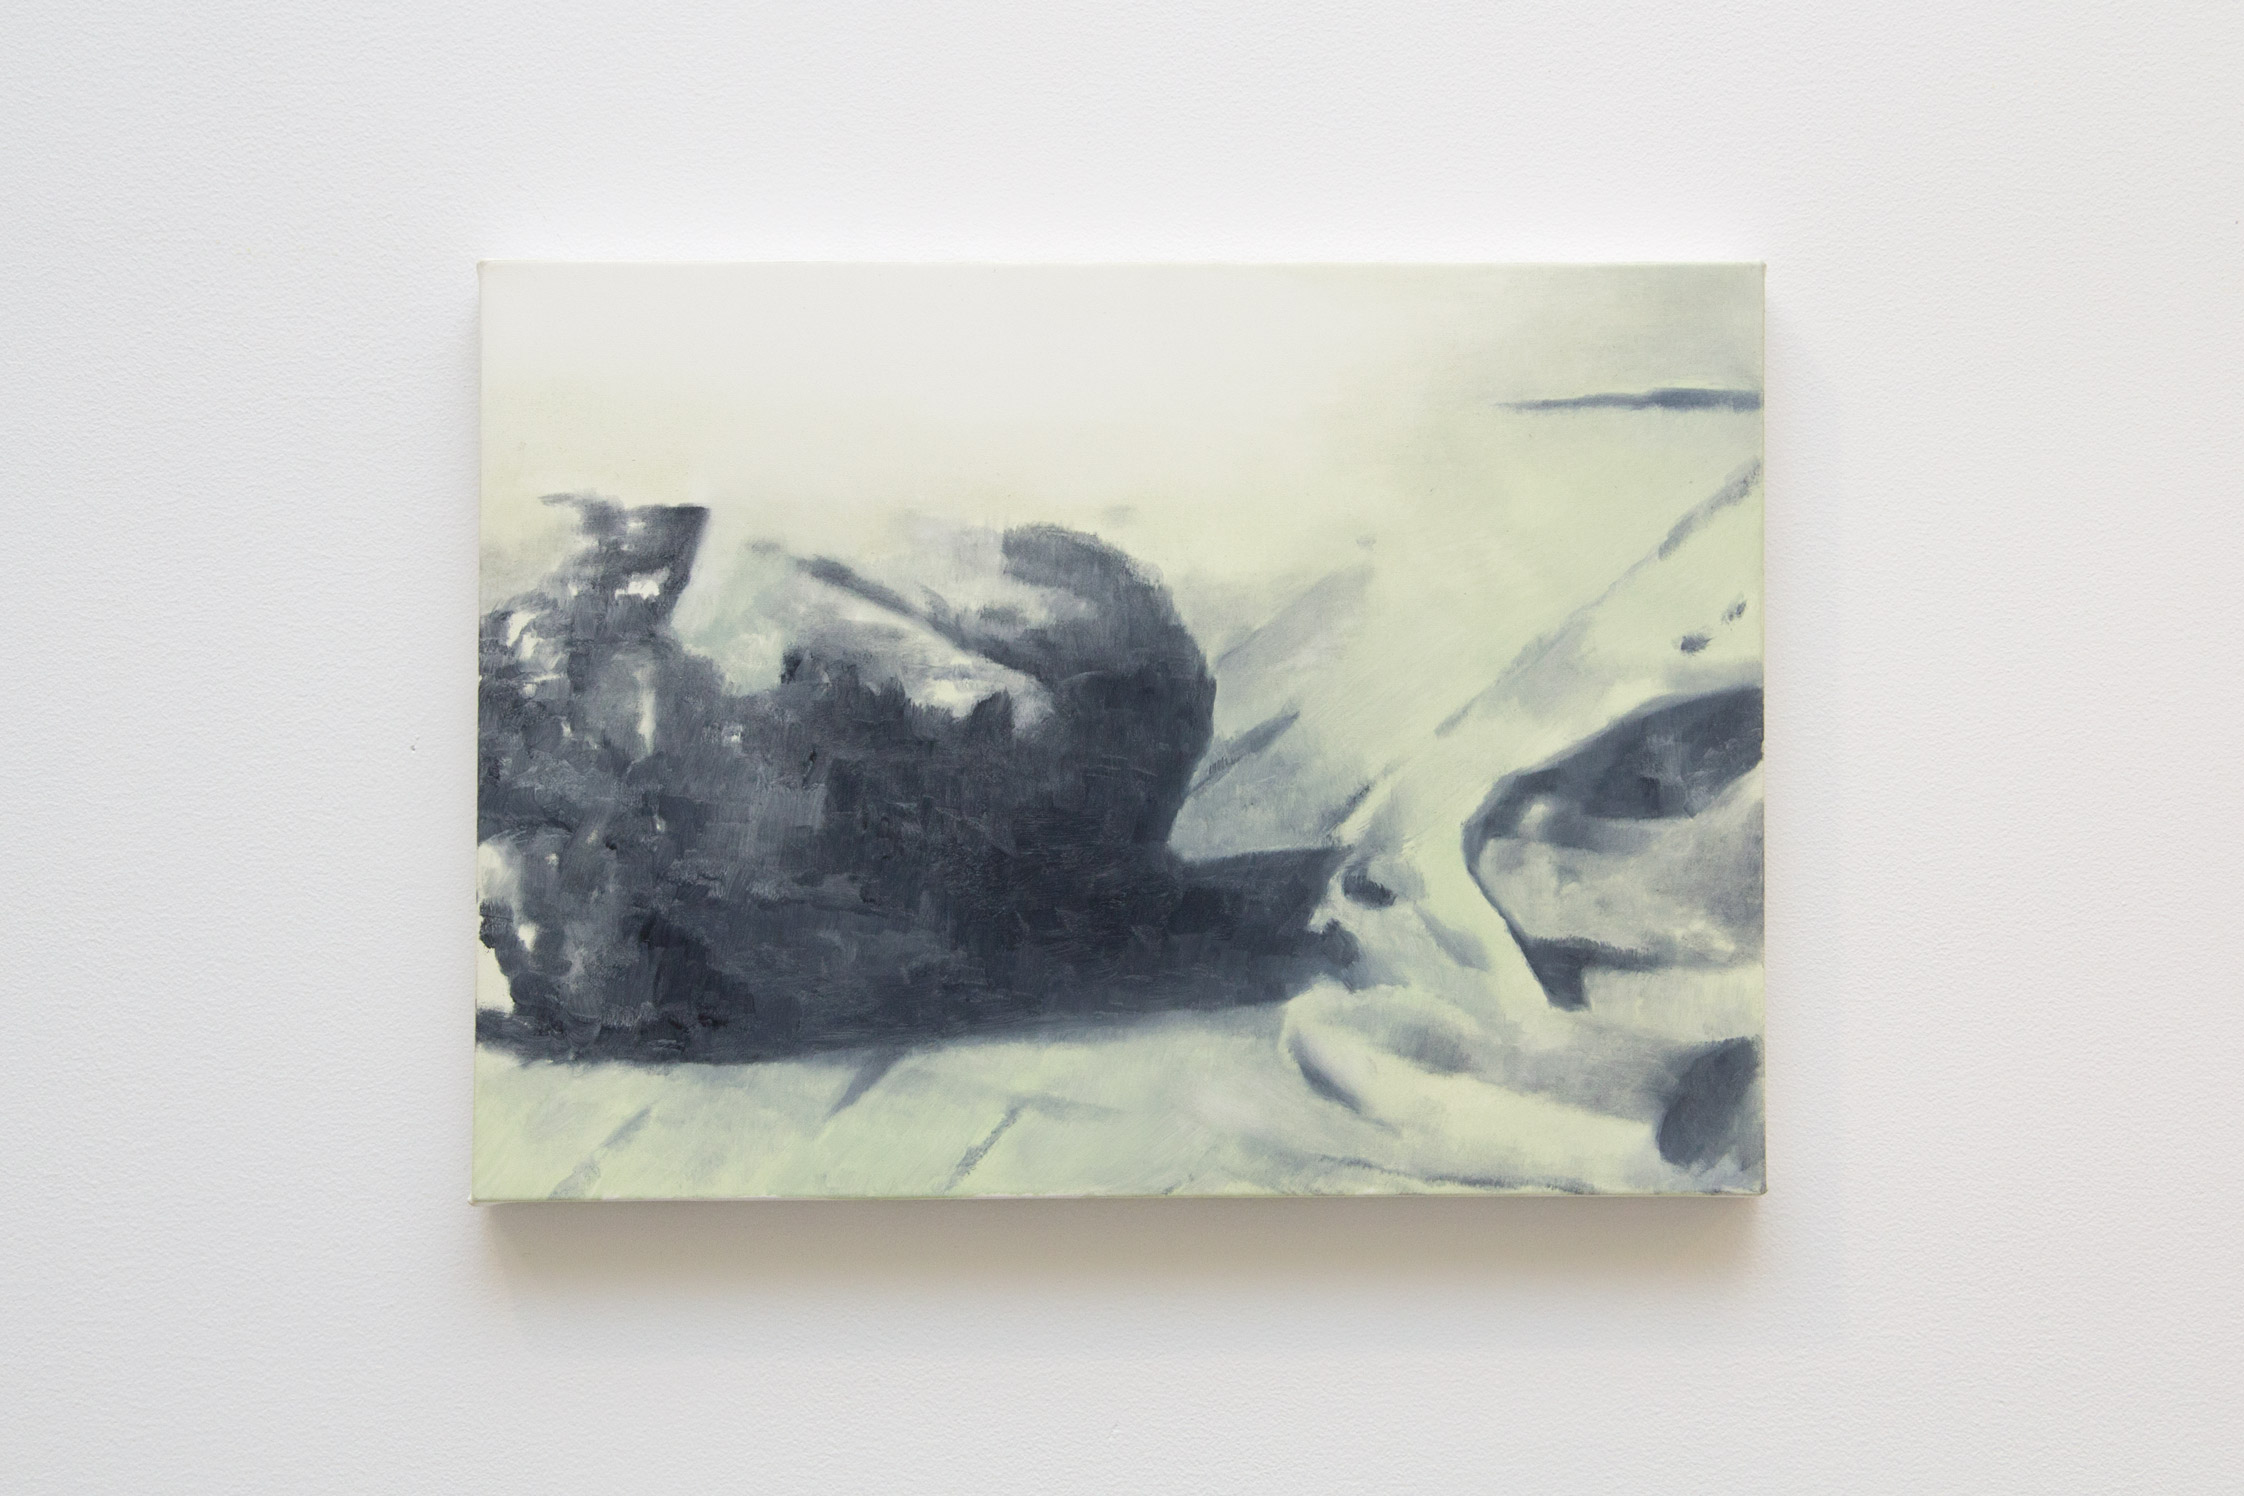 Lucien Smith, Untitled 003 (Joseph Beuys), 2017, oil on linen, 13.25h x 10w in.